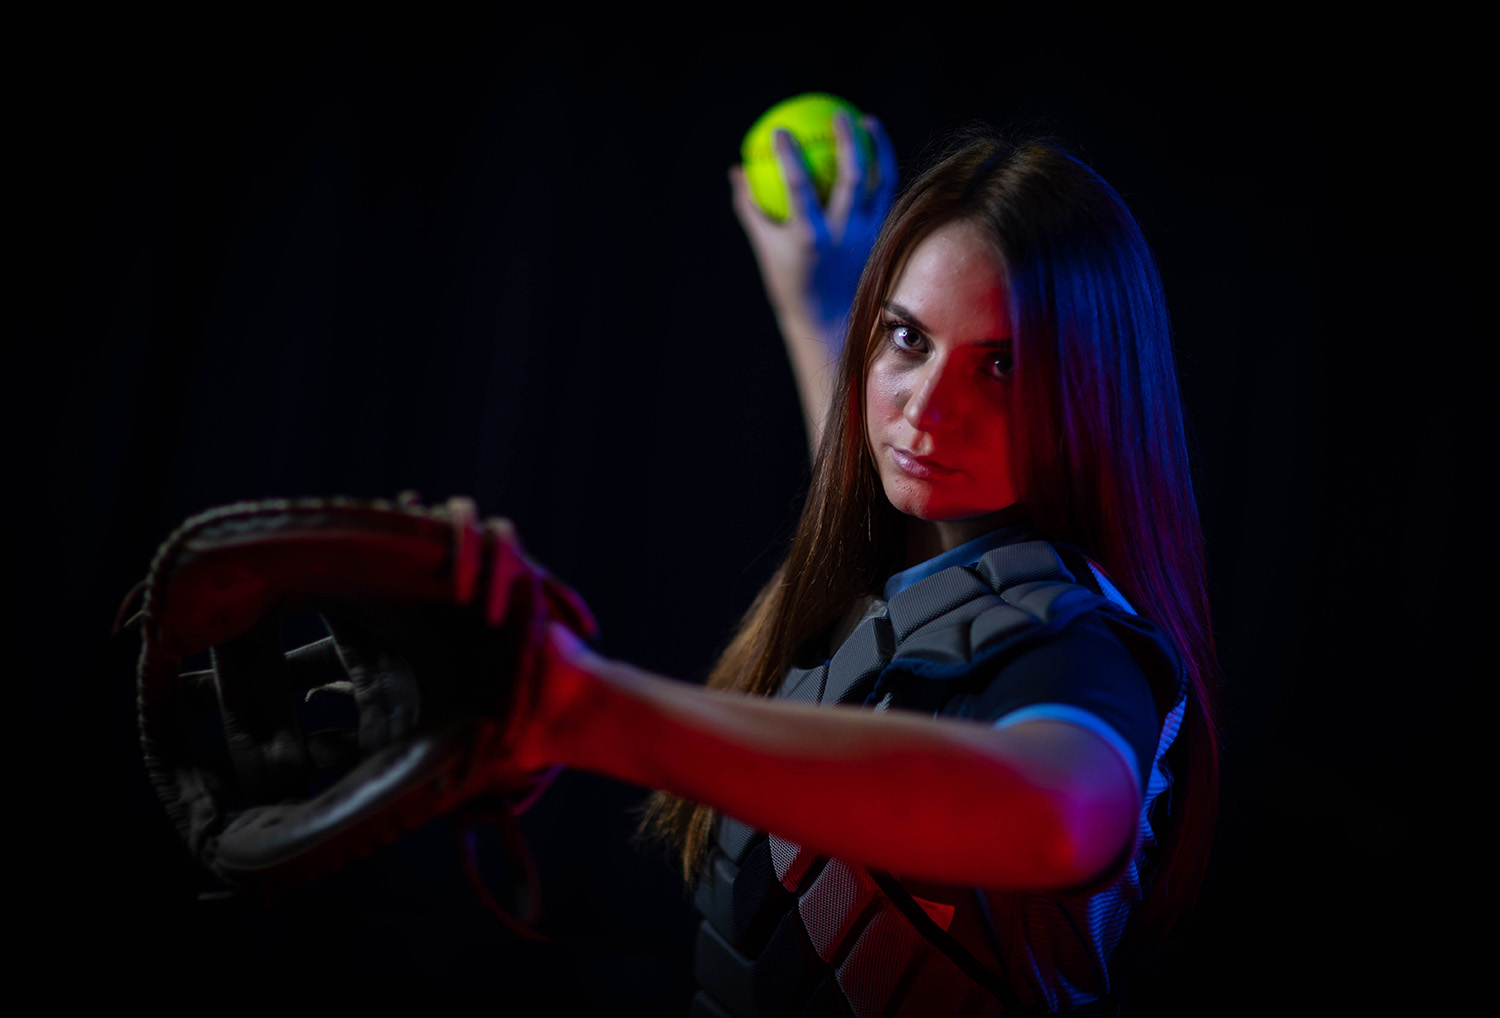 Santa Fe College Saints Softball player during photo day on Dec. 4, 2020. (Matt Stamey/Santa Fe College ) ***Subjects Have Releases***